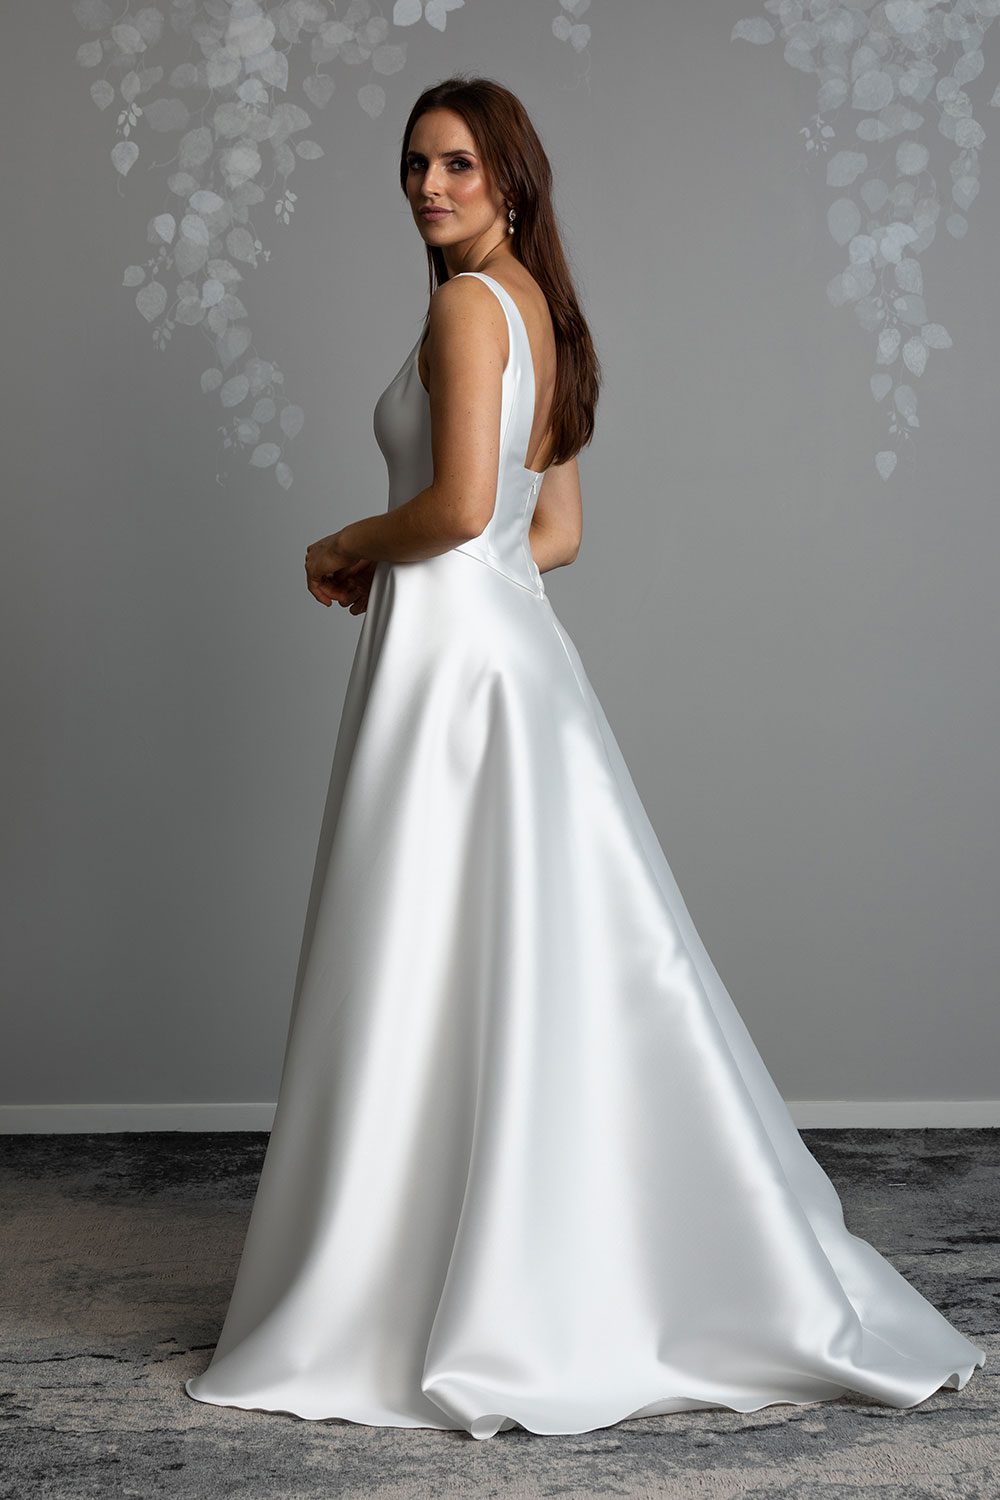 Madison Wedding gown from Vinka Design - This gown is both classic and contemporary, made beautifully with luxurious Mikado satin. The bodice is structured with a deep V-neckline and a squared, low back. Model showing profile view of gown with beautiful Mikado satin and the low square cut back with full skirt with elegant sweeping train